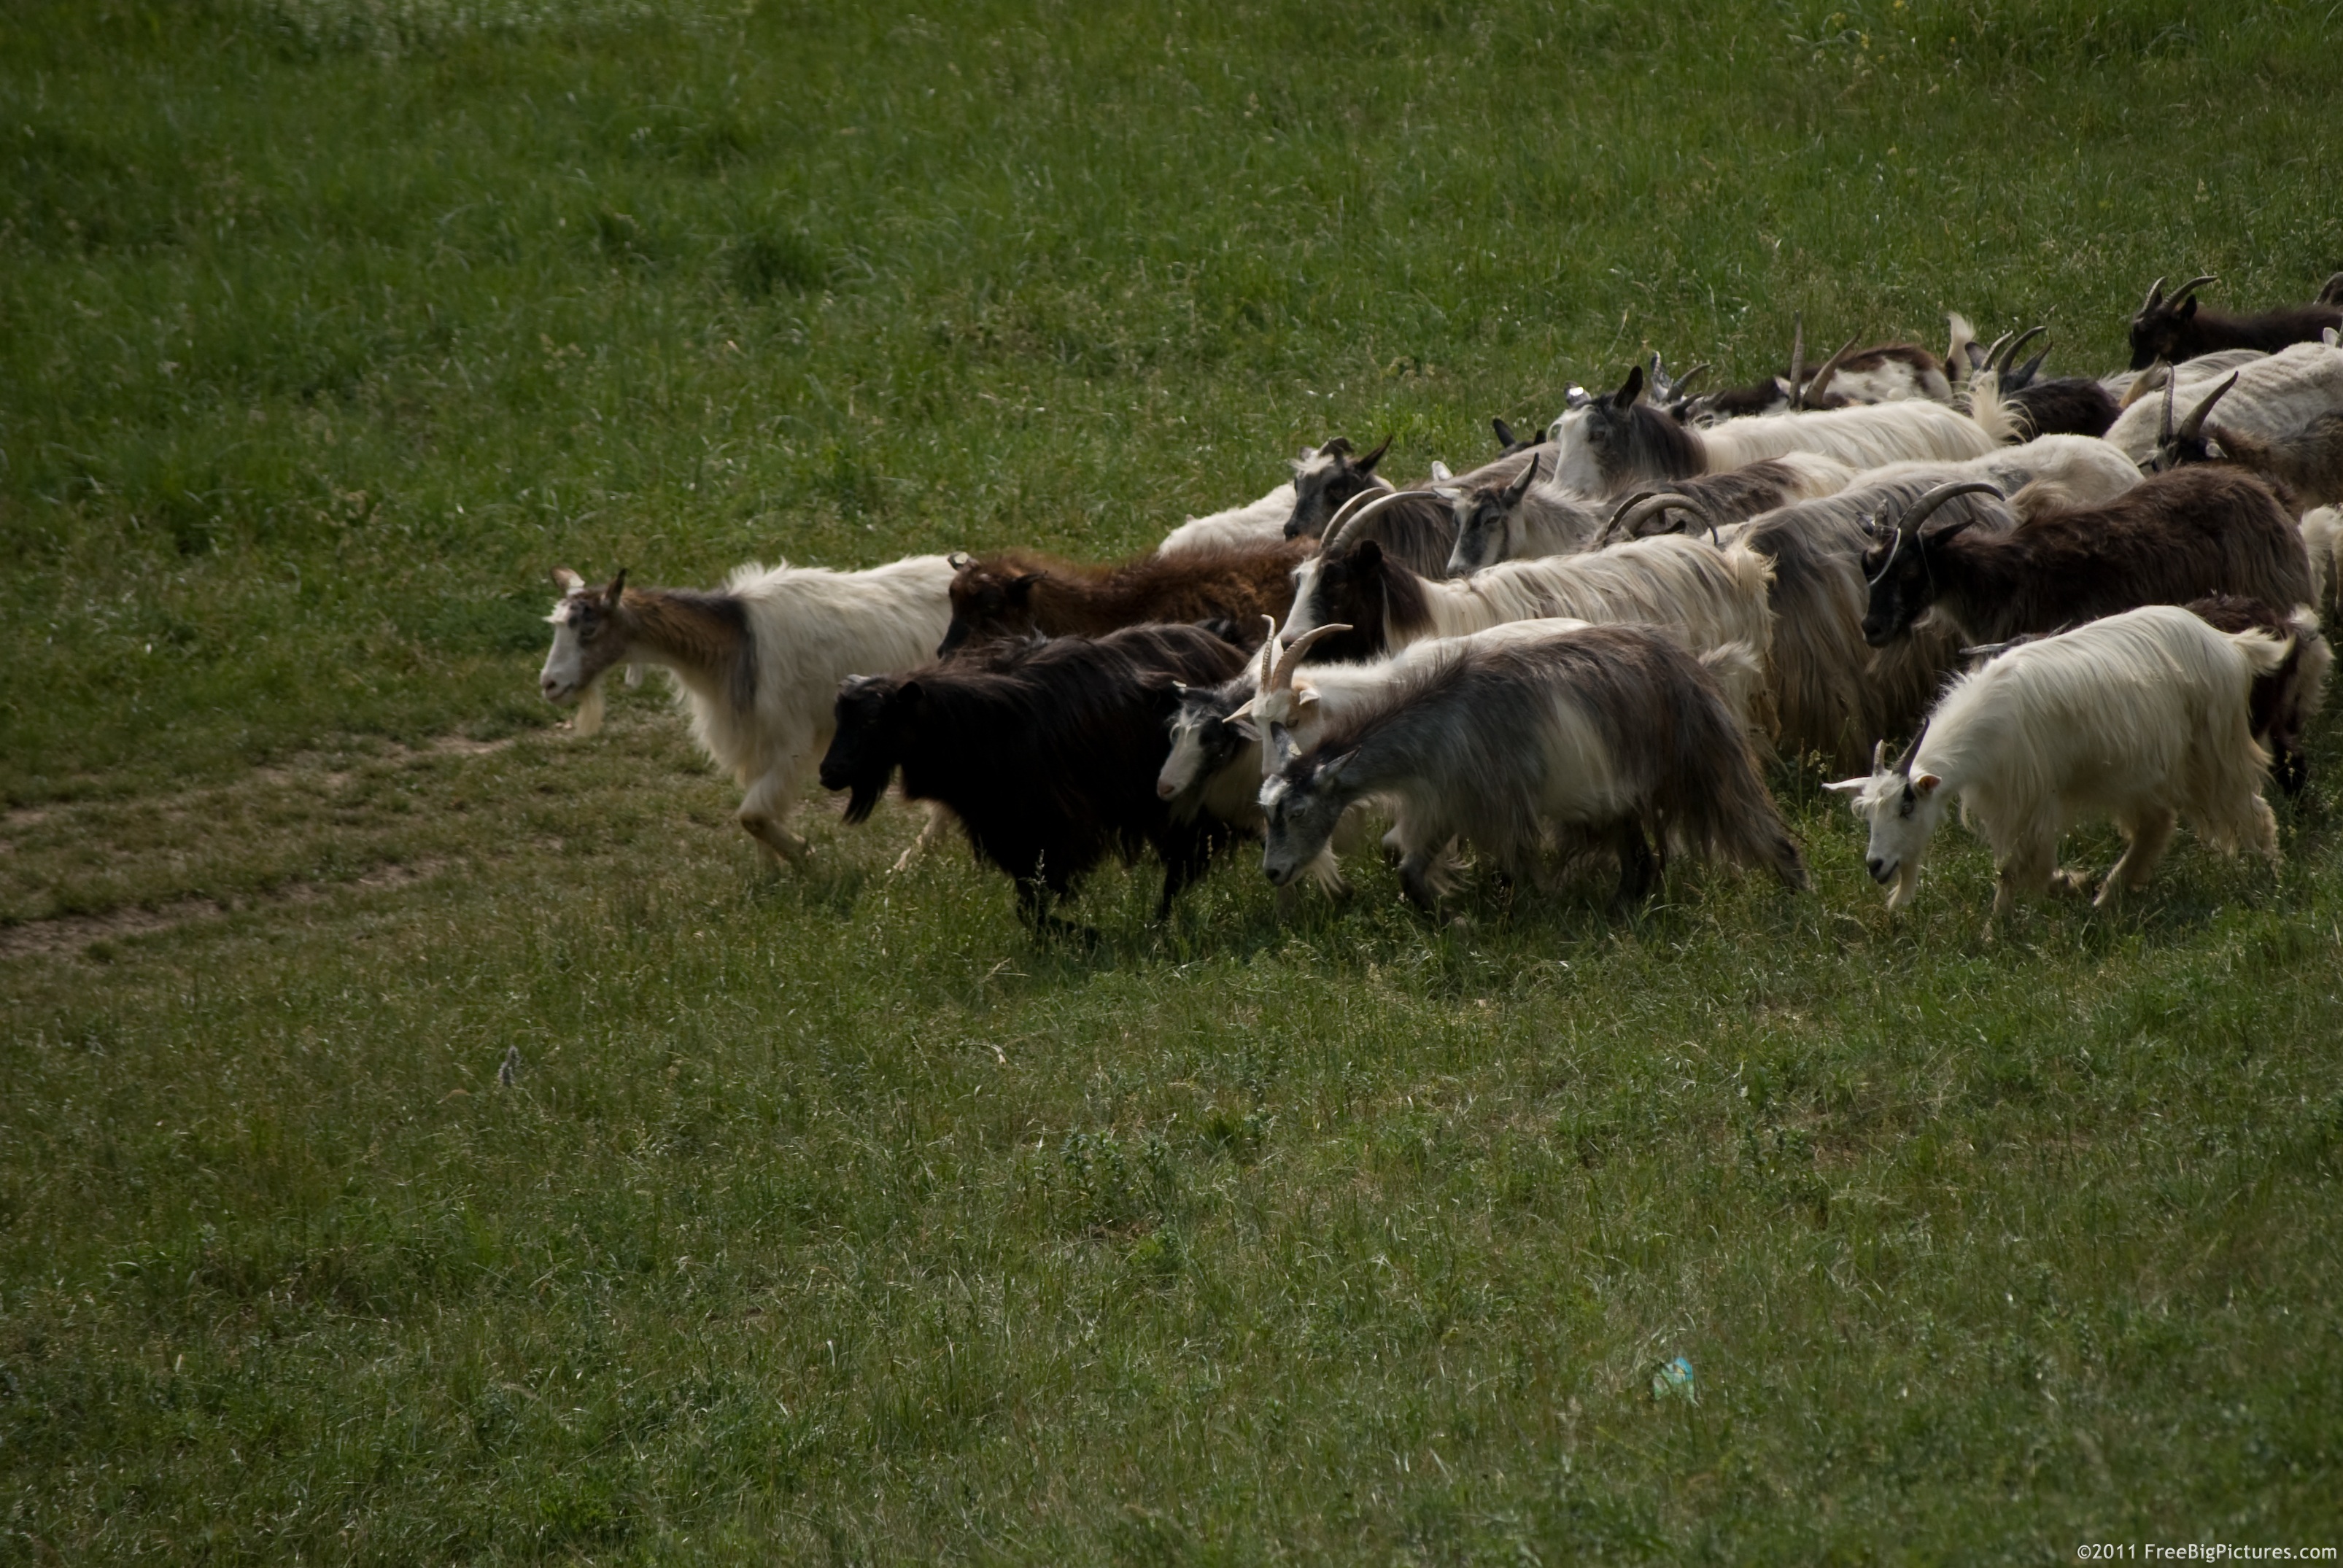 A herd of goats on pasture in a hot day